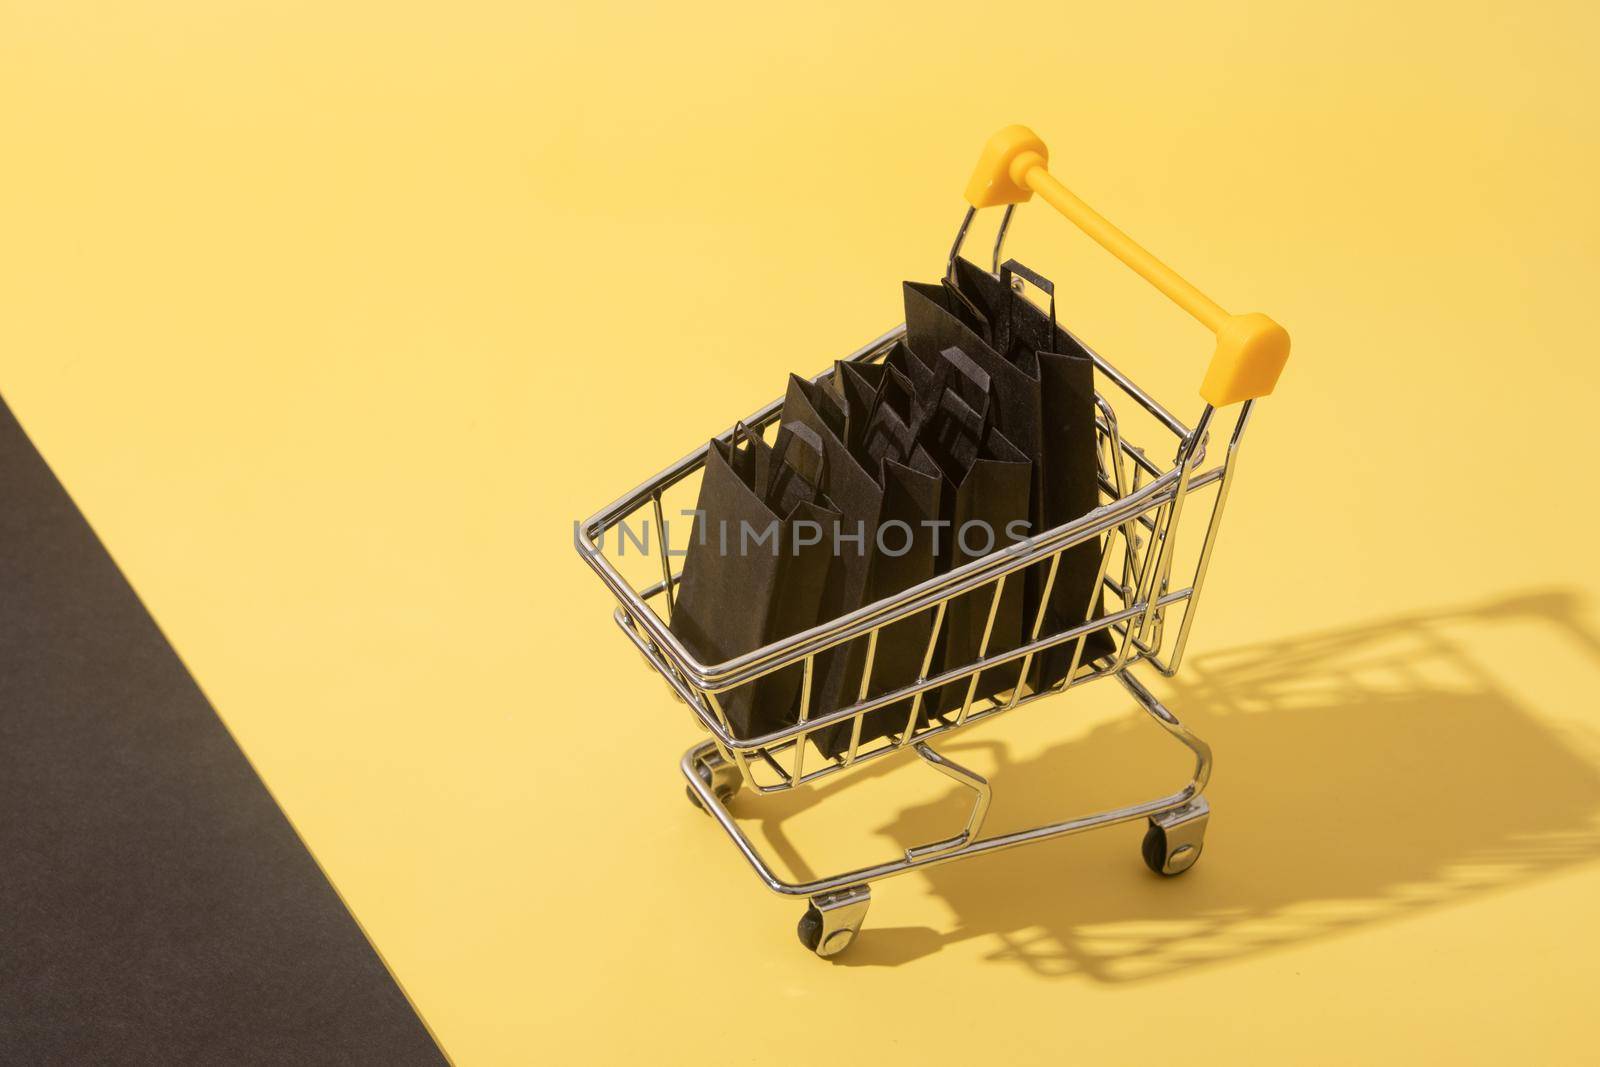 Miniature supermarket cart with shopping bags in black friday sale